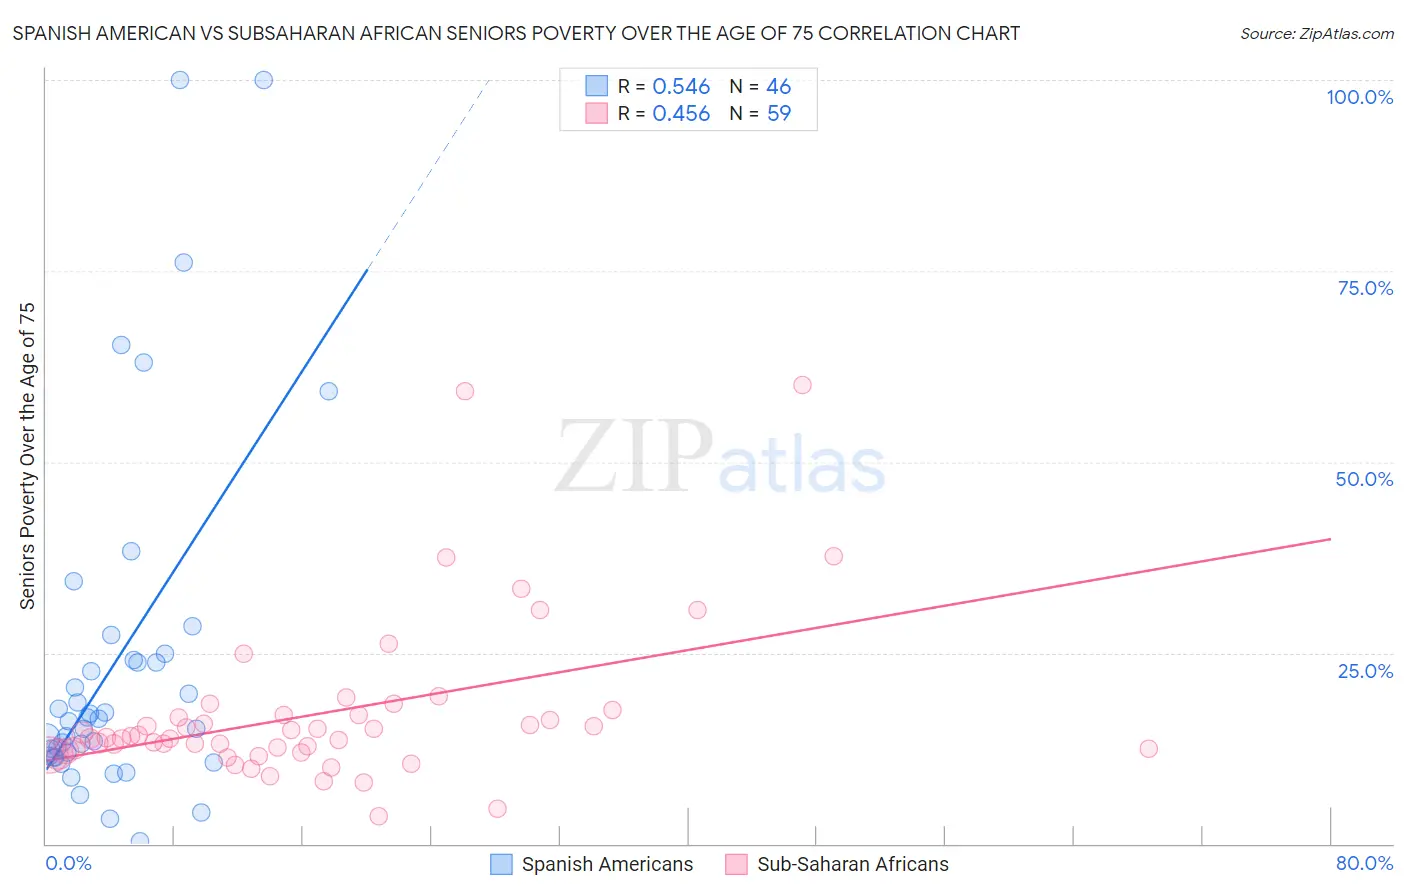 Spanish American vs Subsaharan African Seniors Poverty Over the Age of 75